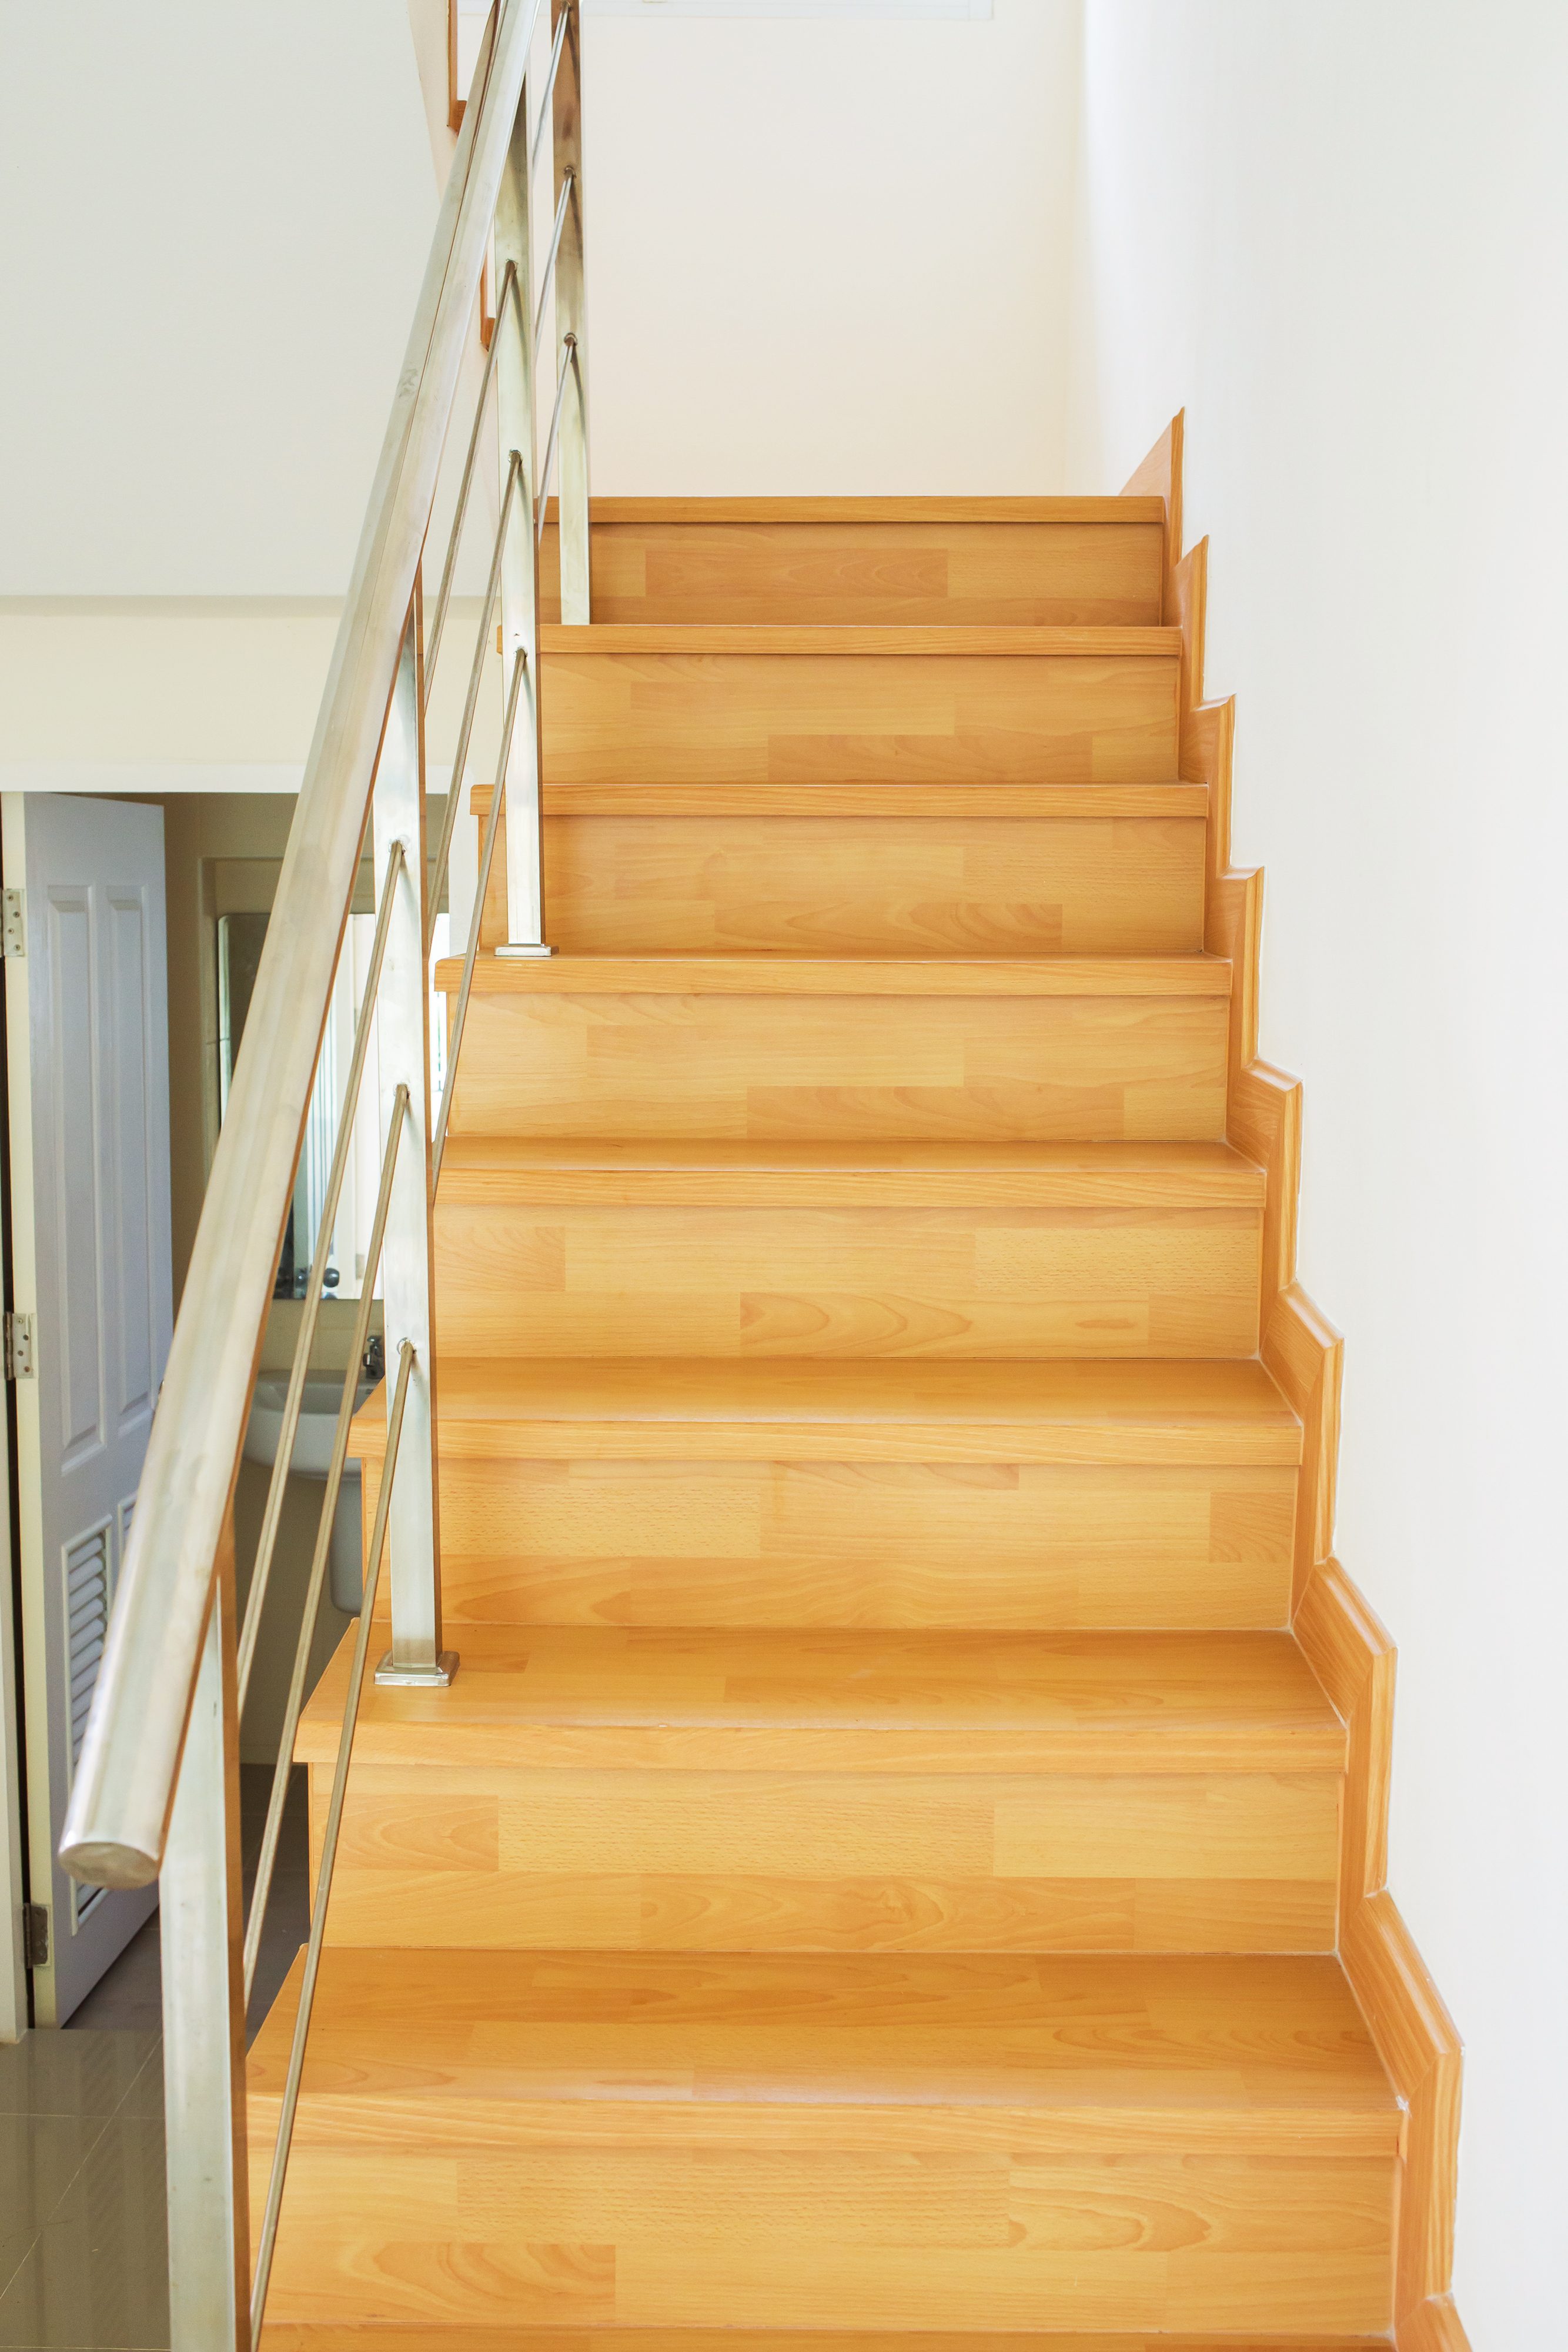 Can I put wood flooring on my staircase?